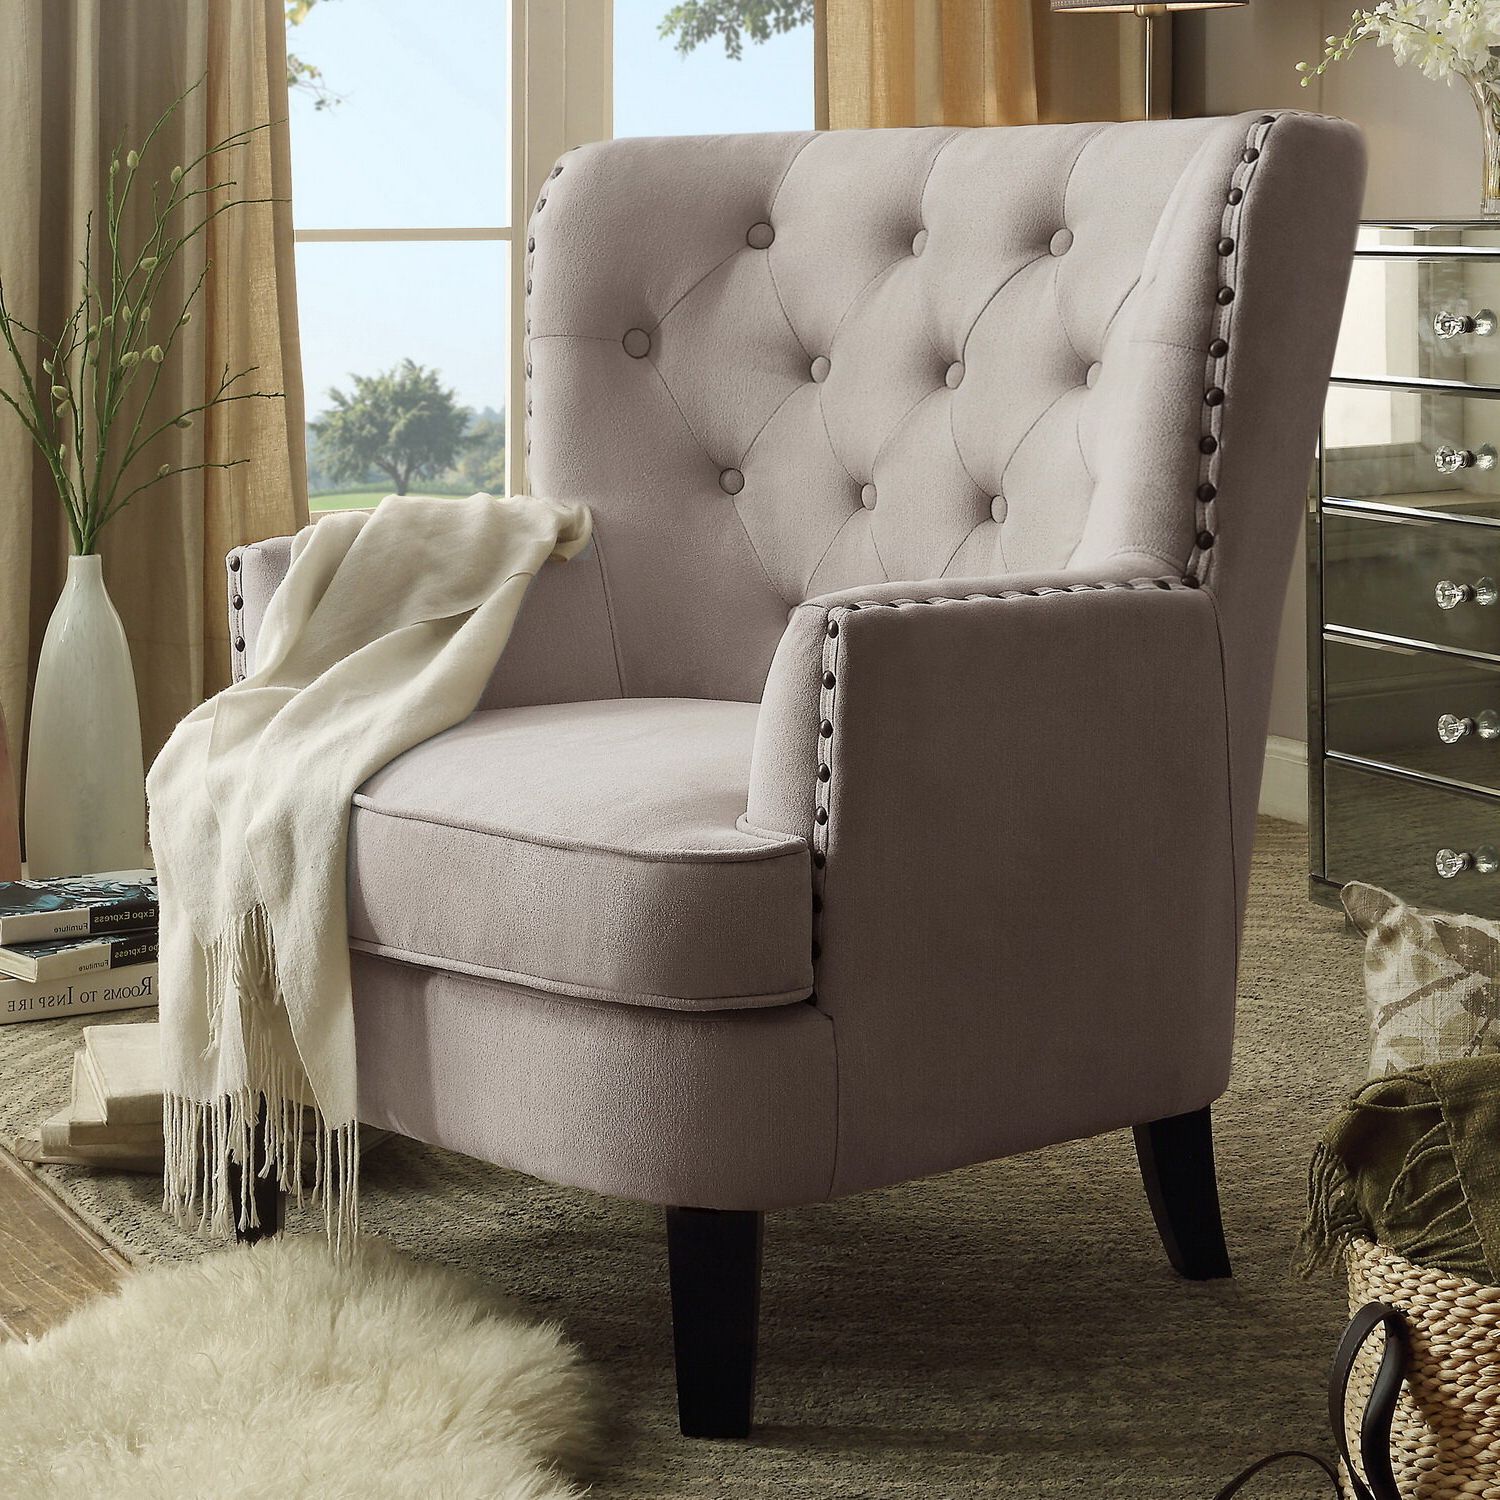 Laurel Foundry Modern Farmhouse Ivo 30" W Tufted Wingback With Regard To Most Current Galesville Tufted Polyester Wingback Chairs (View 8 of 20)